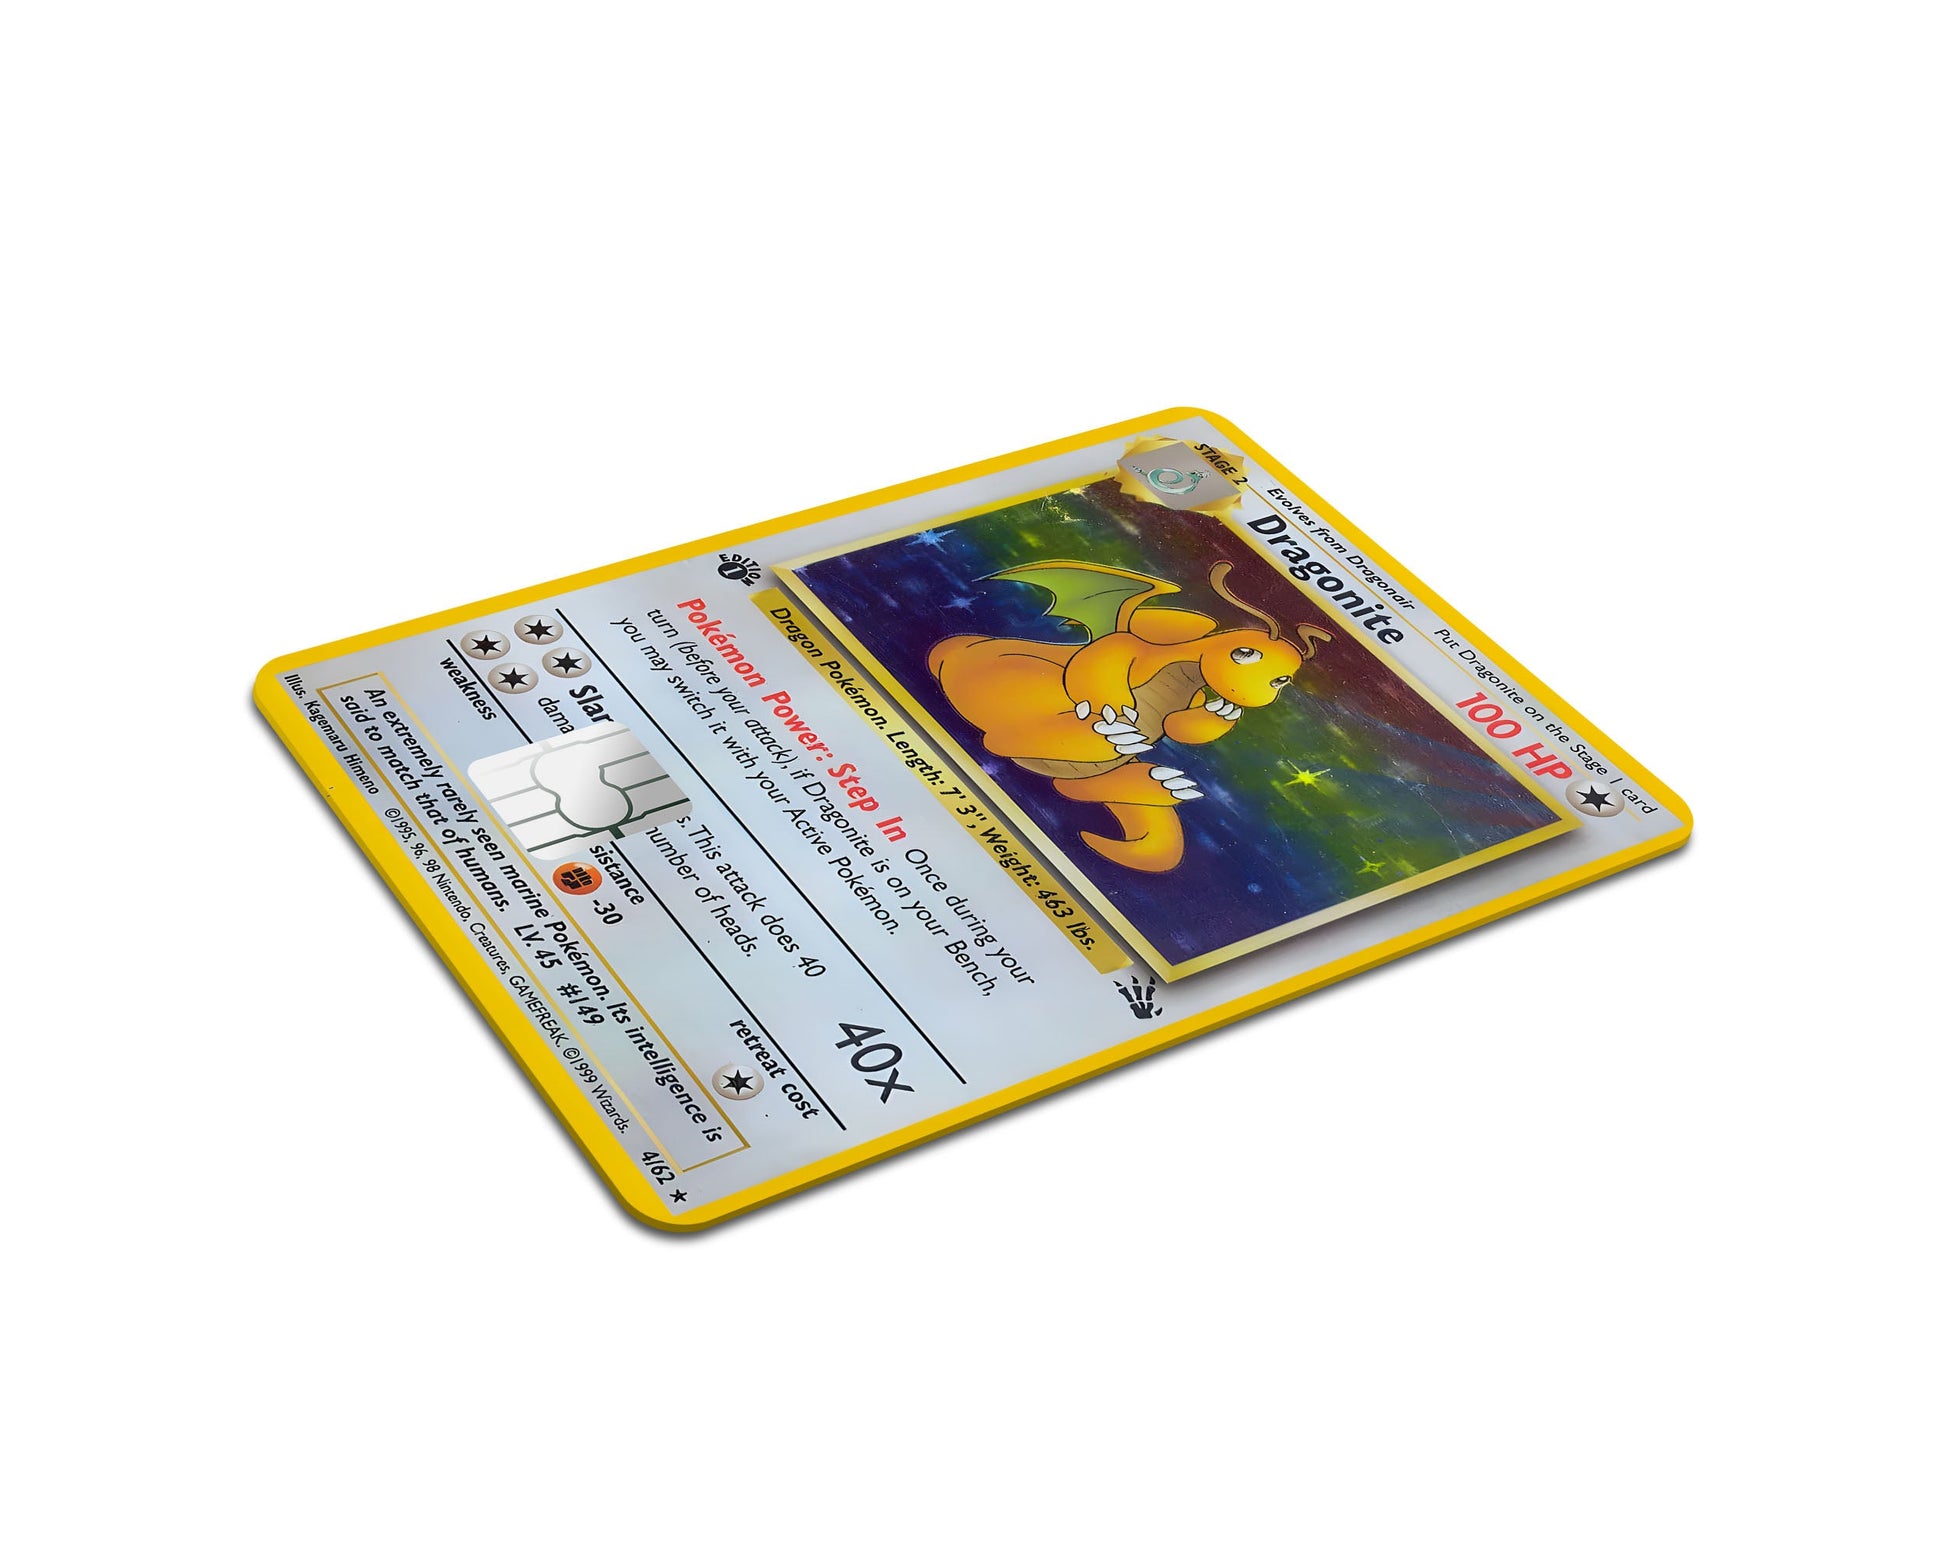 Anime Town Creations Credit Card Dragonite Pokemon Card Full Skins - Anime Pokemon Credit Card Skin